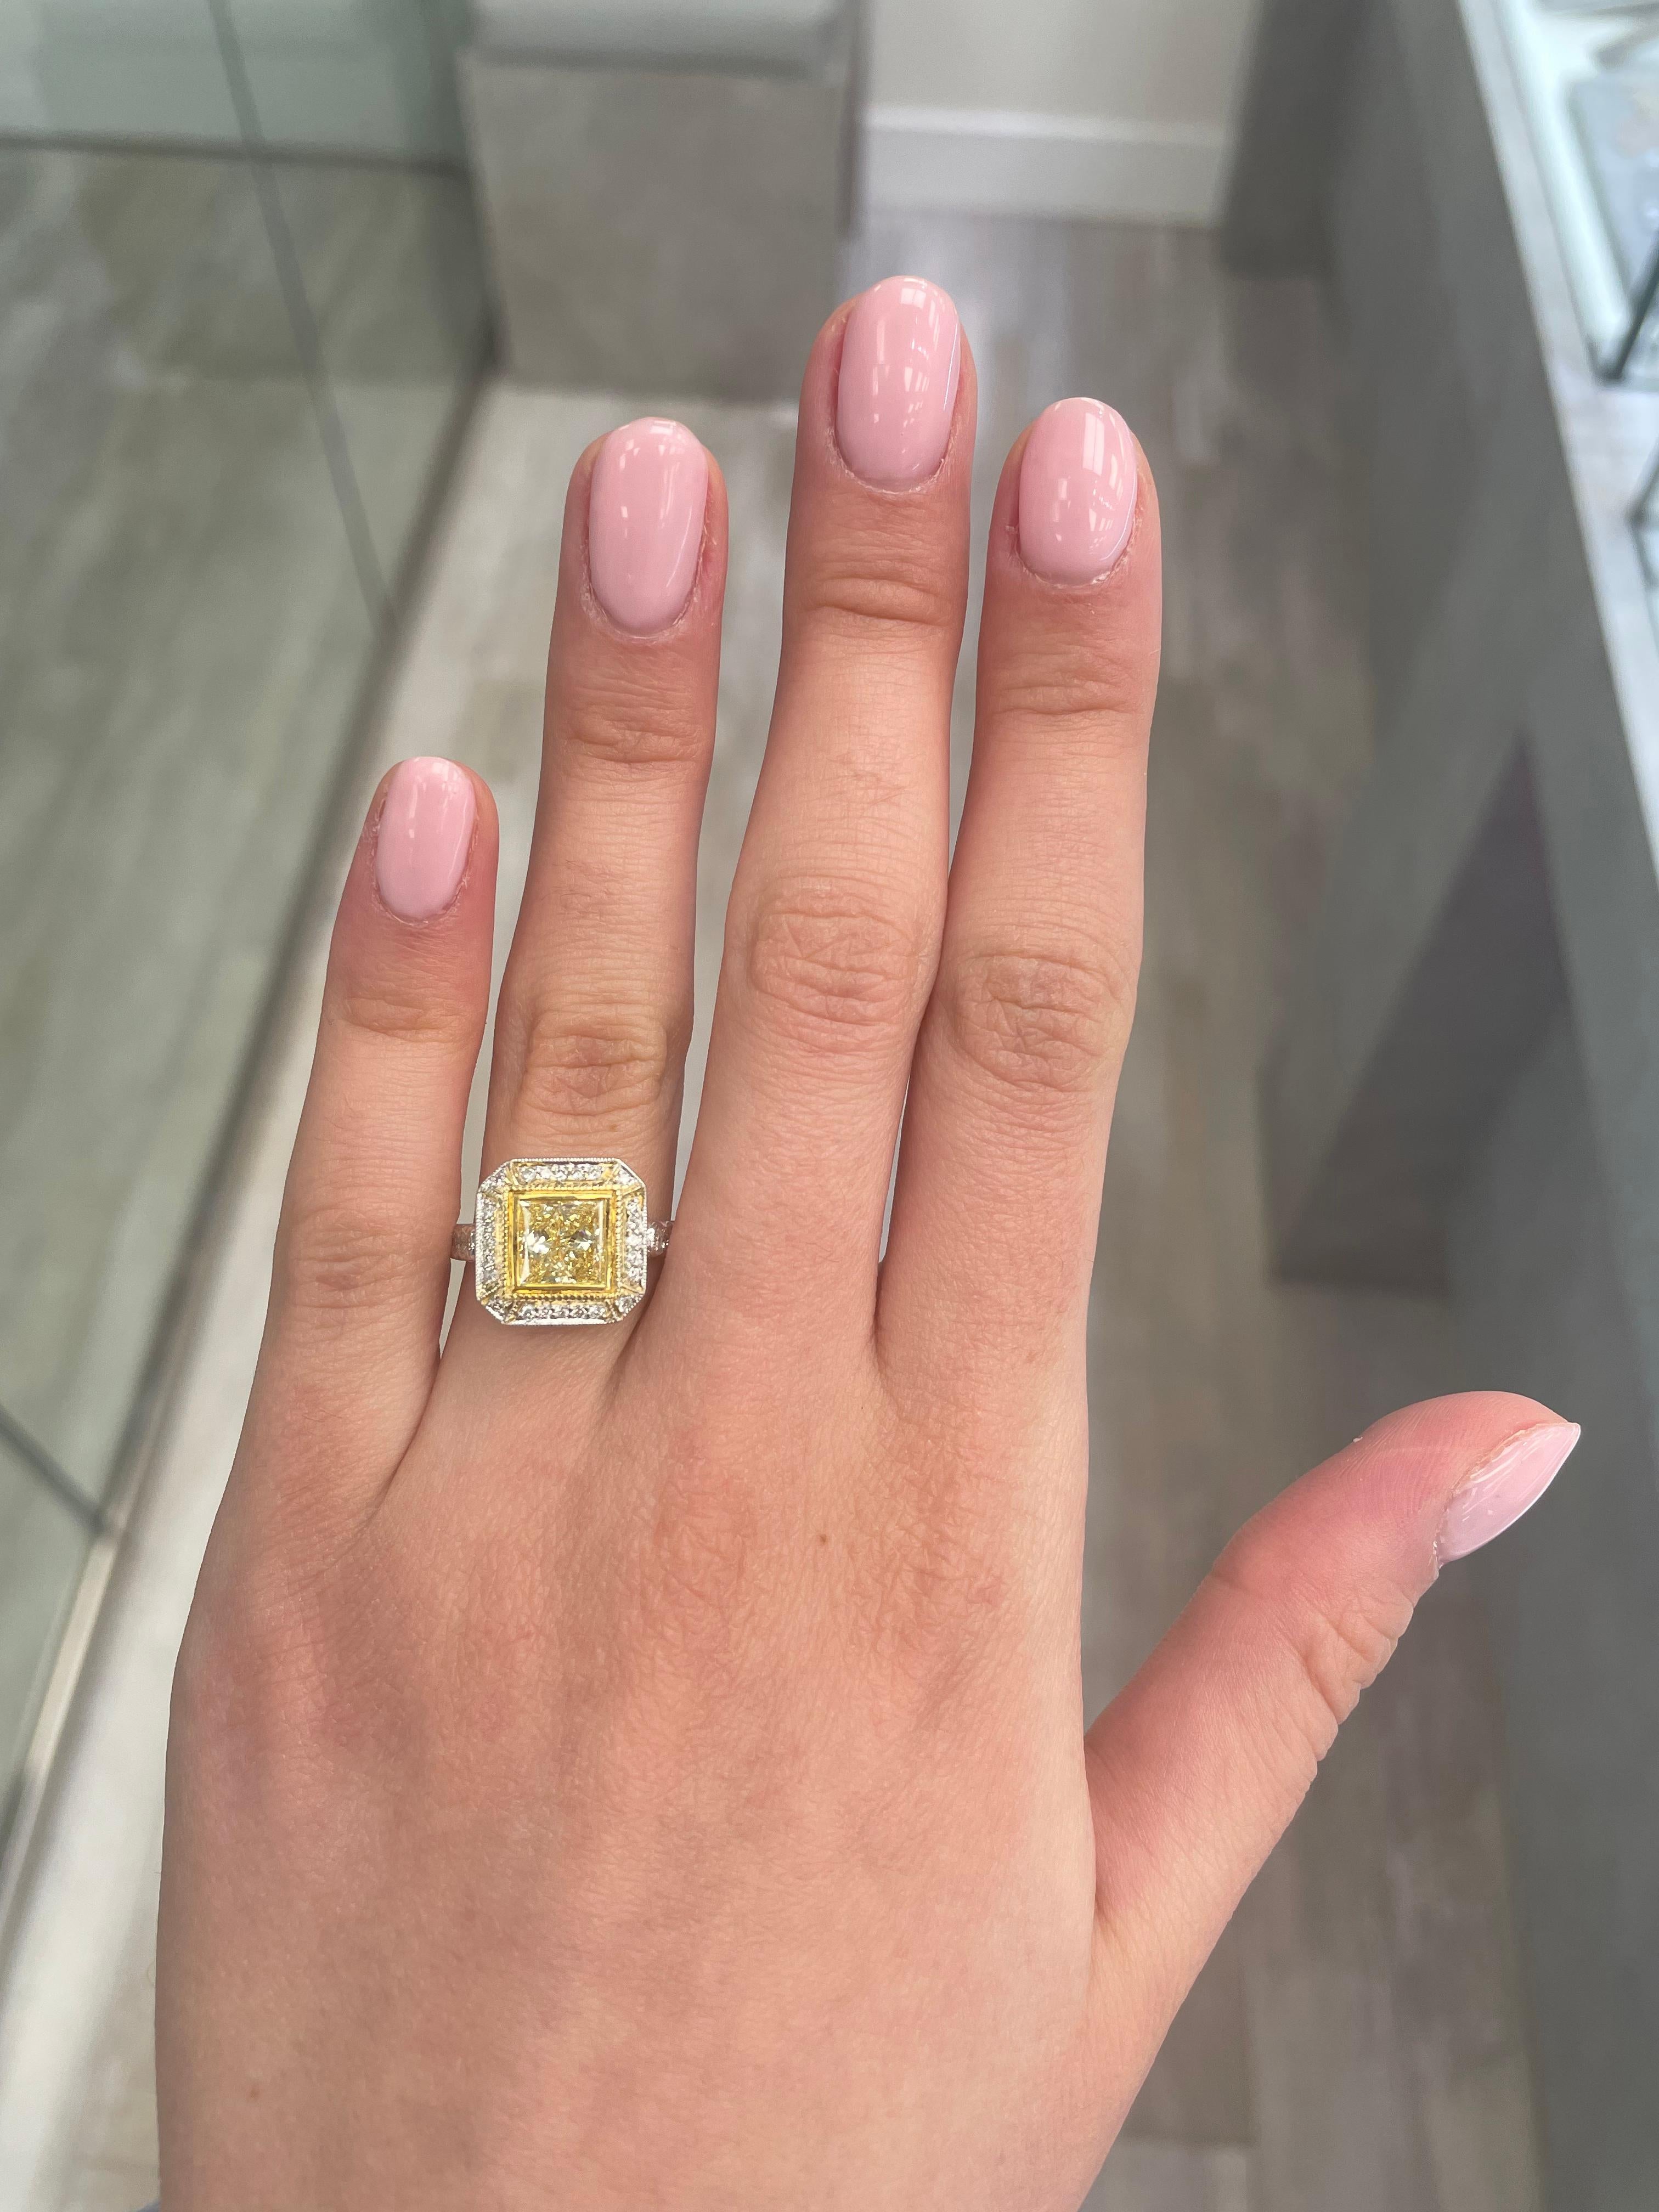 Stunning modern EGL certified fancy yellow diamond halo ring, two-tone 18k yellow and white gold, with milgrain work. By Alexander Beverly Hills
2.43 carats total diamond weight.
1.64 carat princess cut Fancy Yellow color and SI3 clarity diamond,